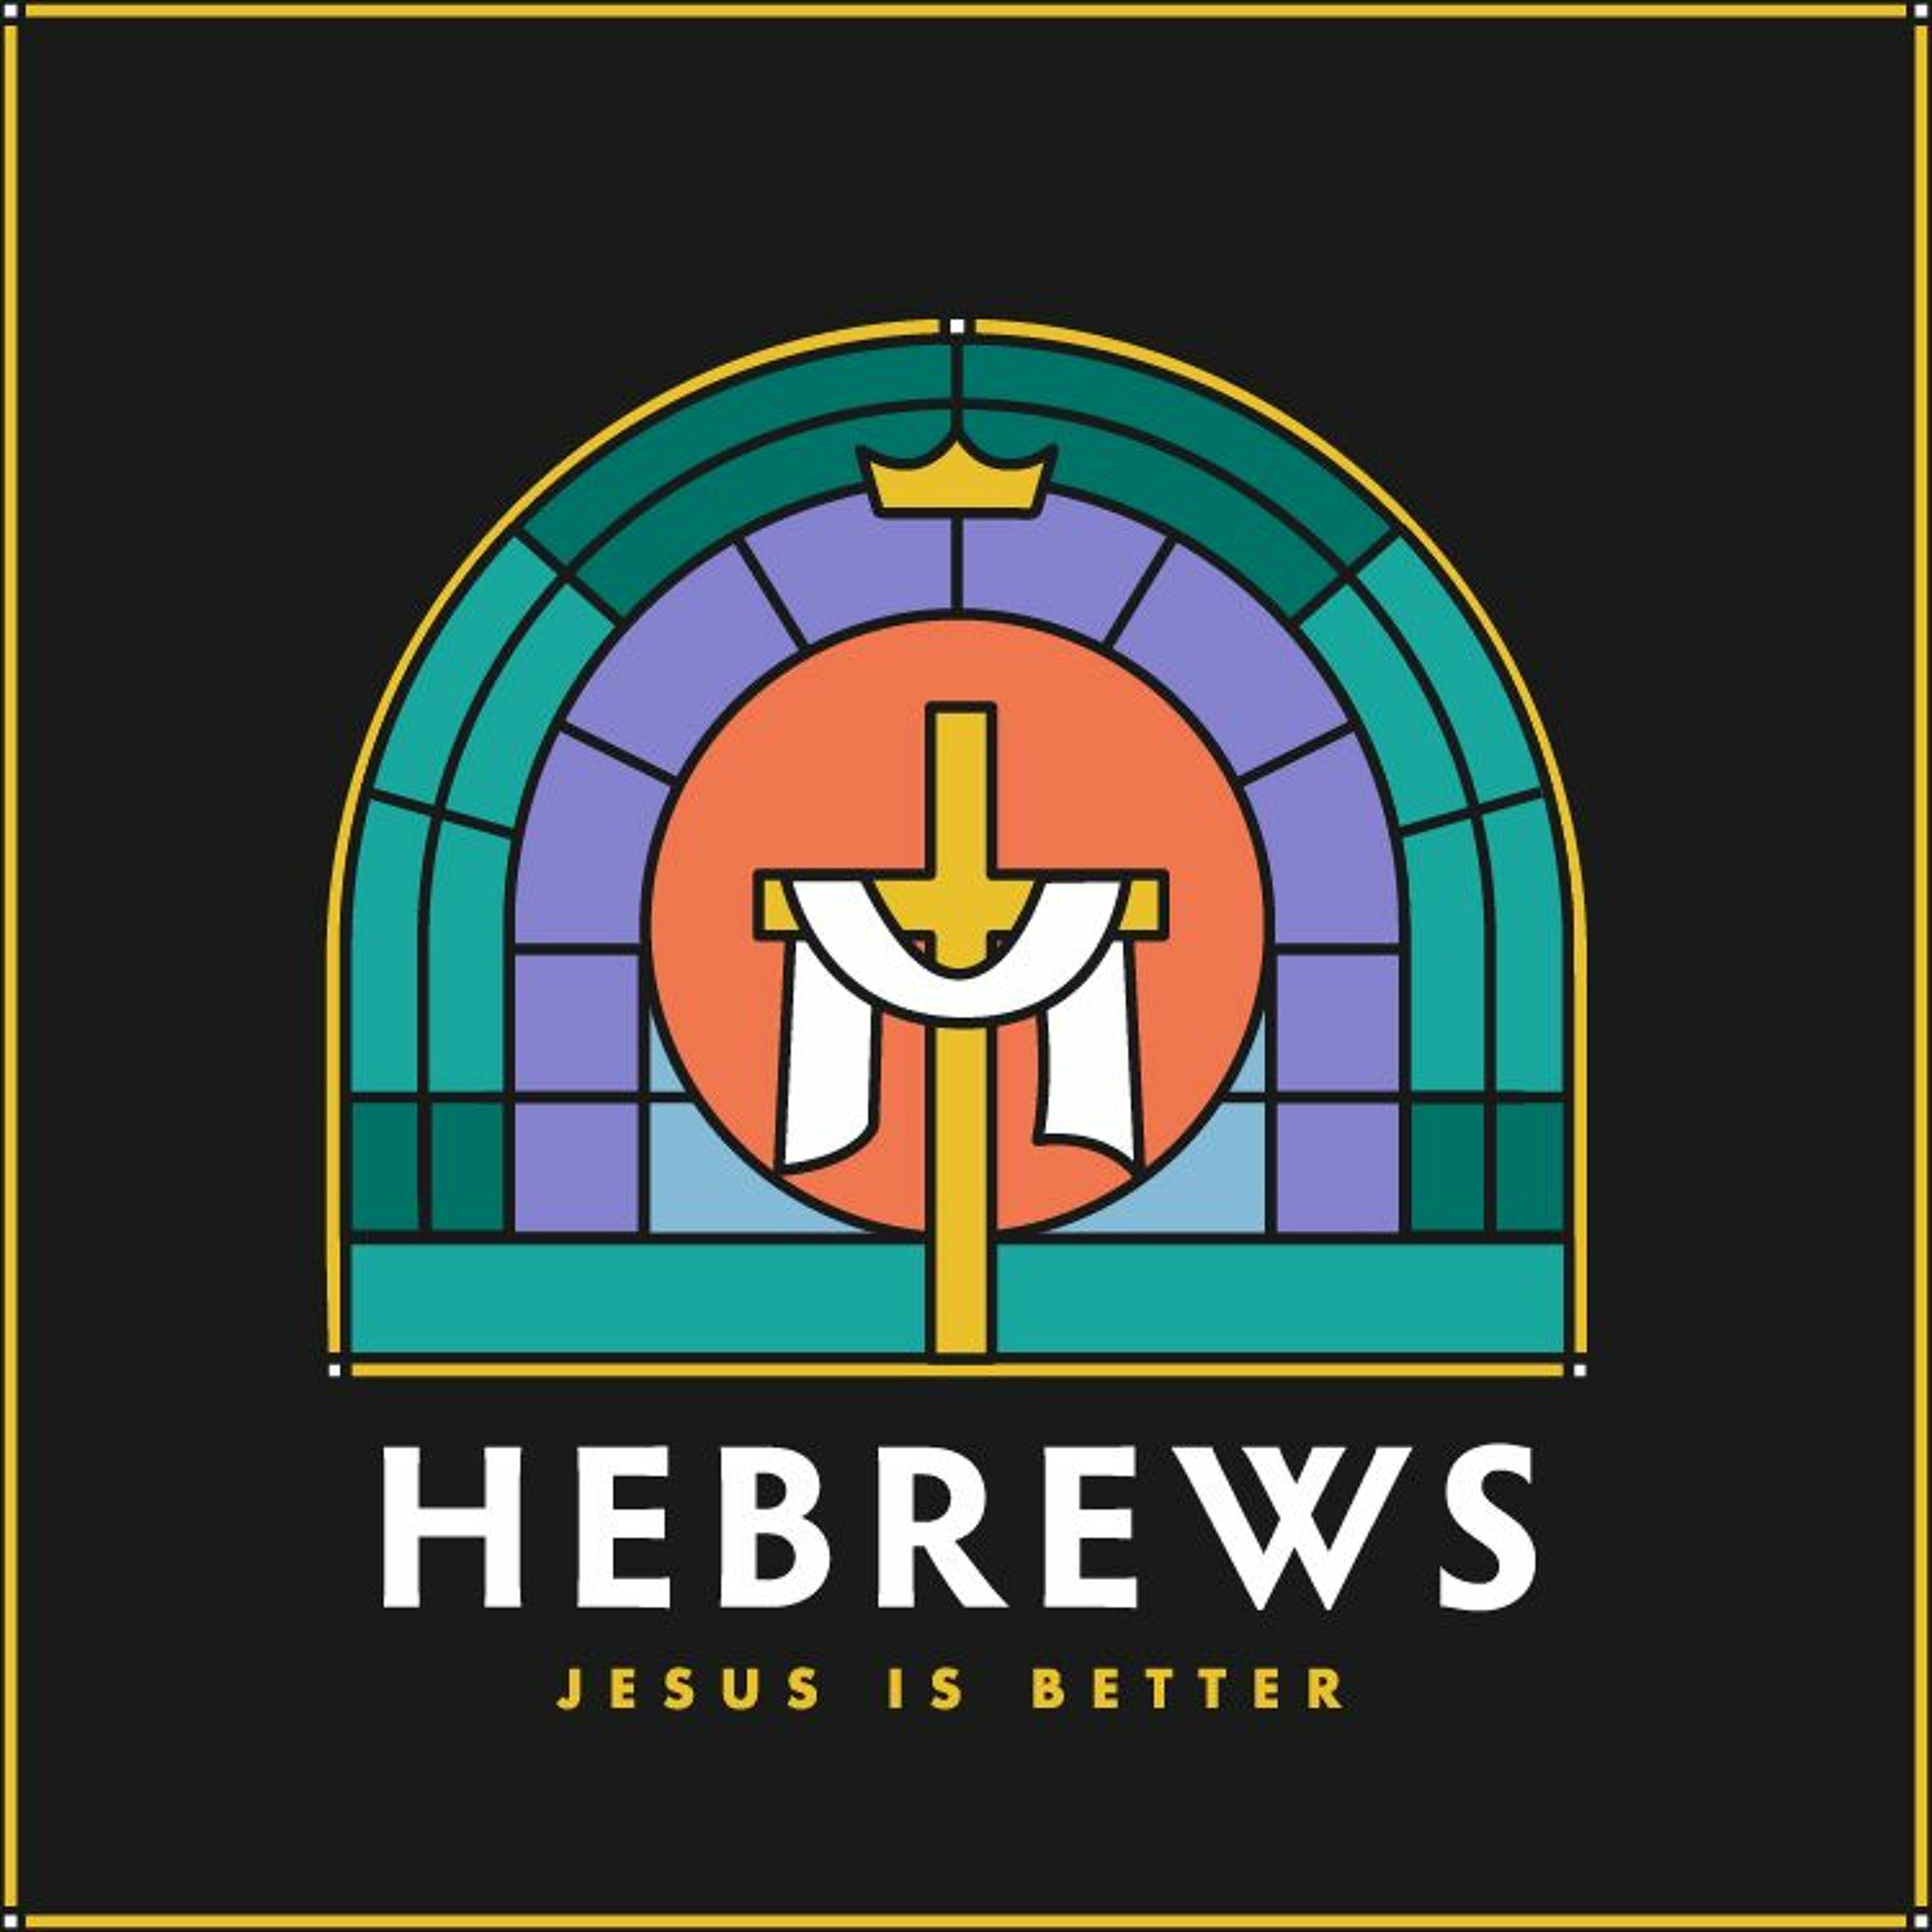 Our Perfect Priest-King (Hebrews 7:11-22)